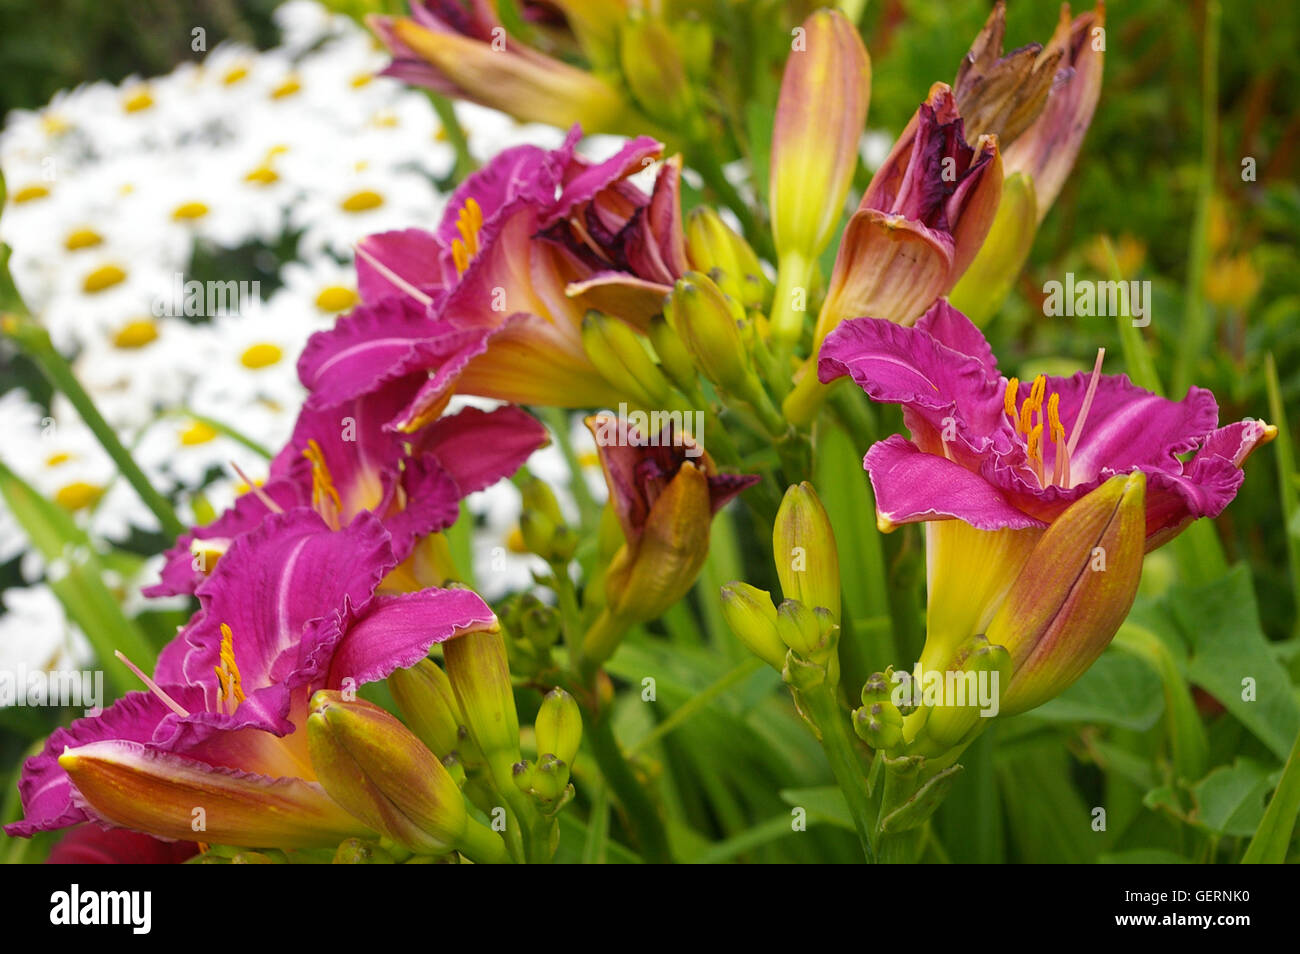 Beautiful Pink Lilies and White Daisies Stock Photo